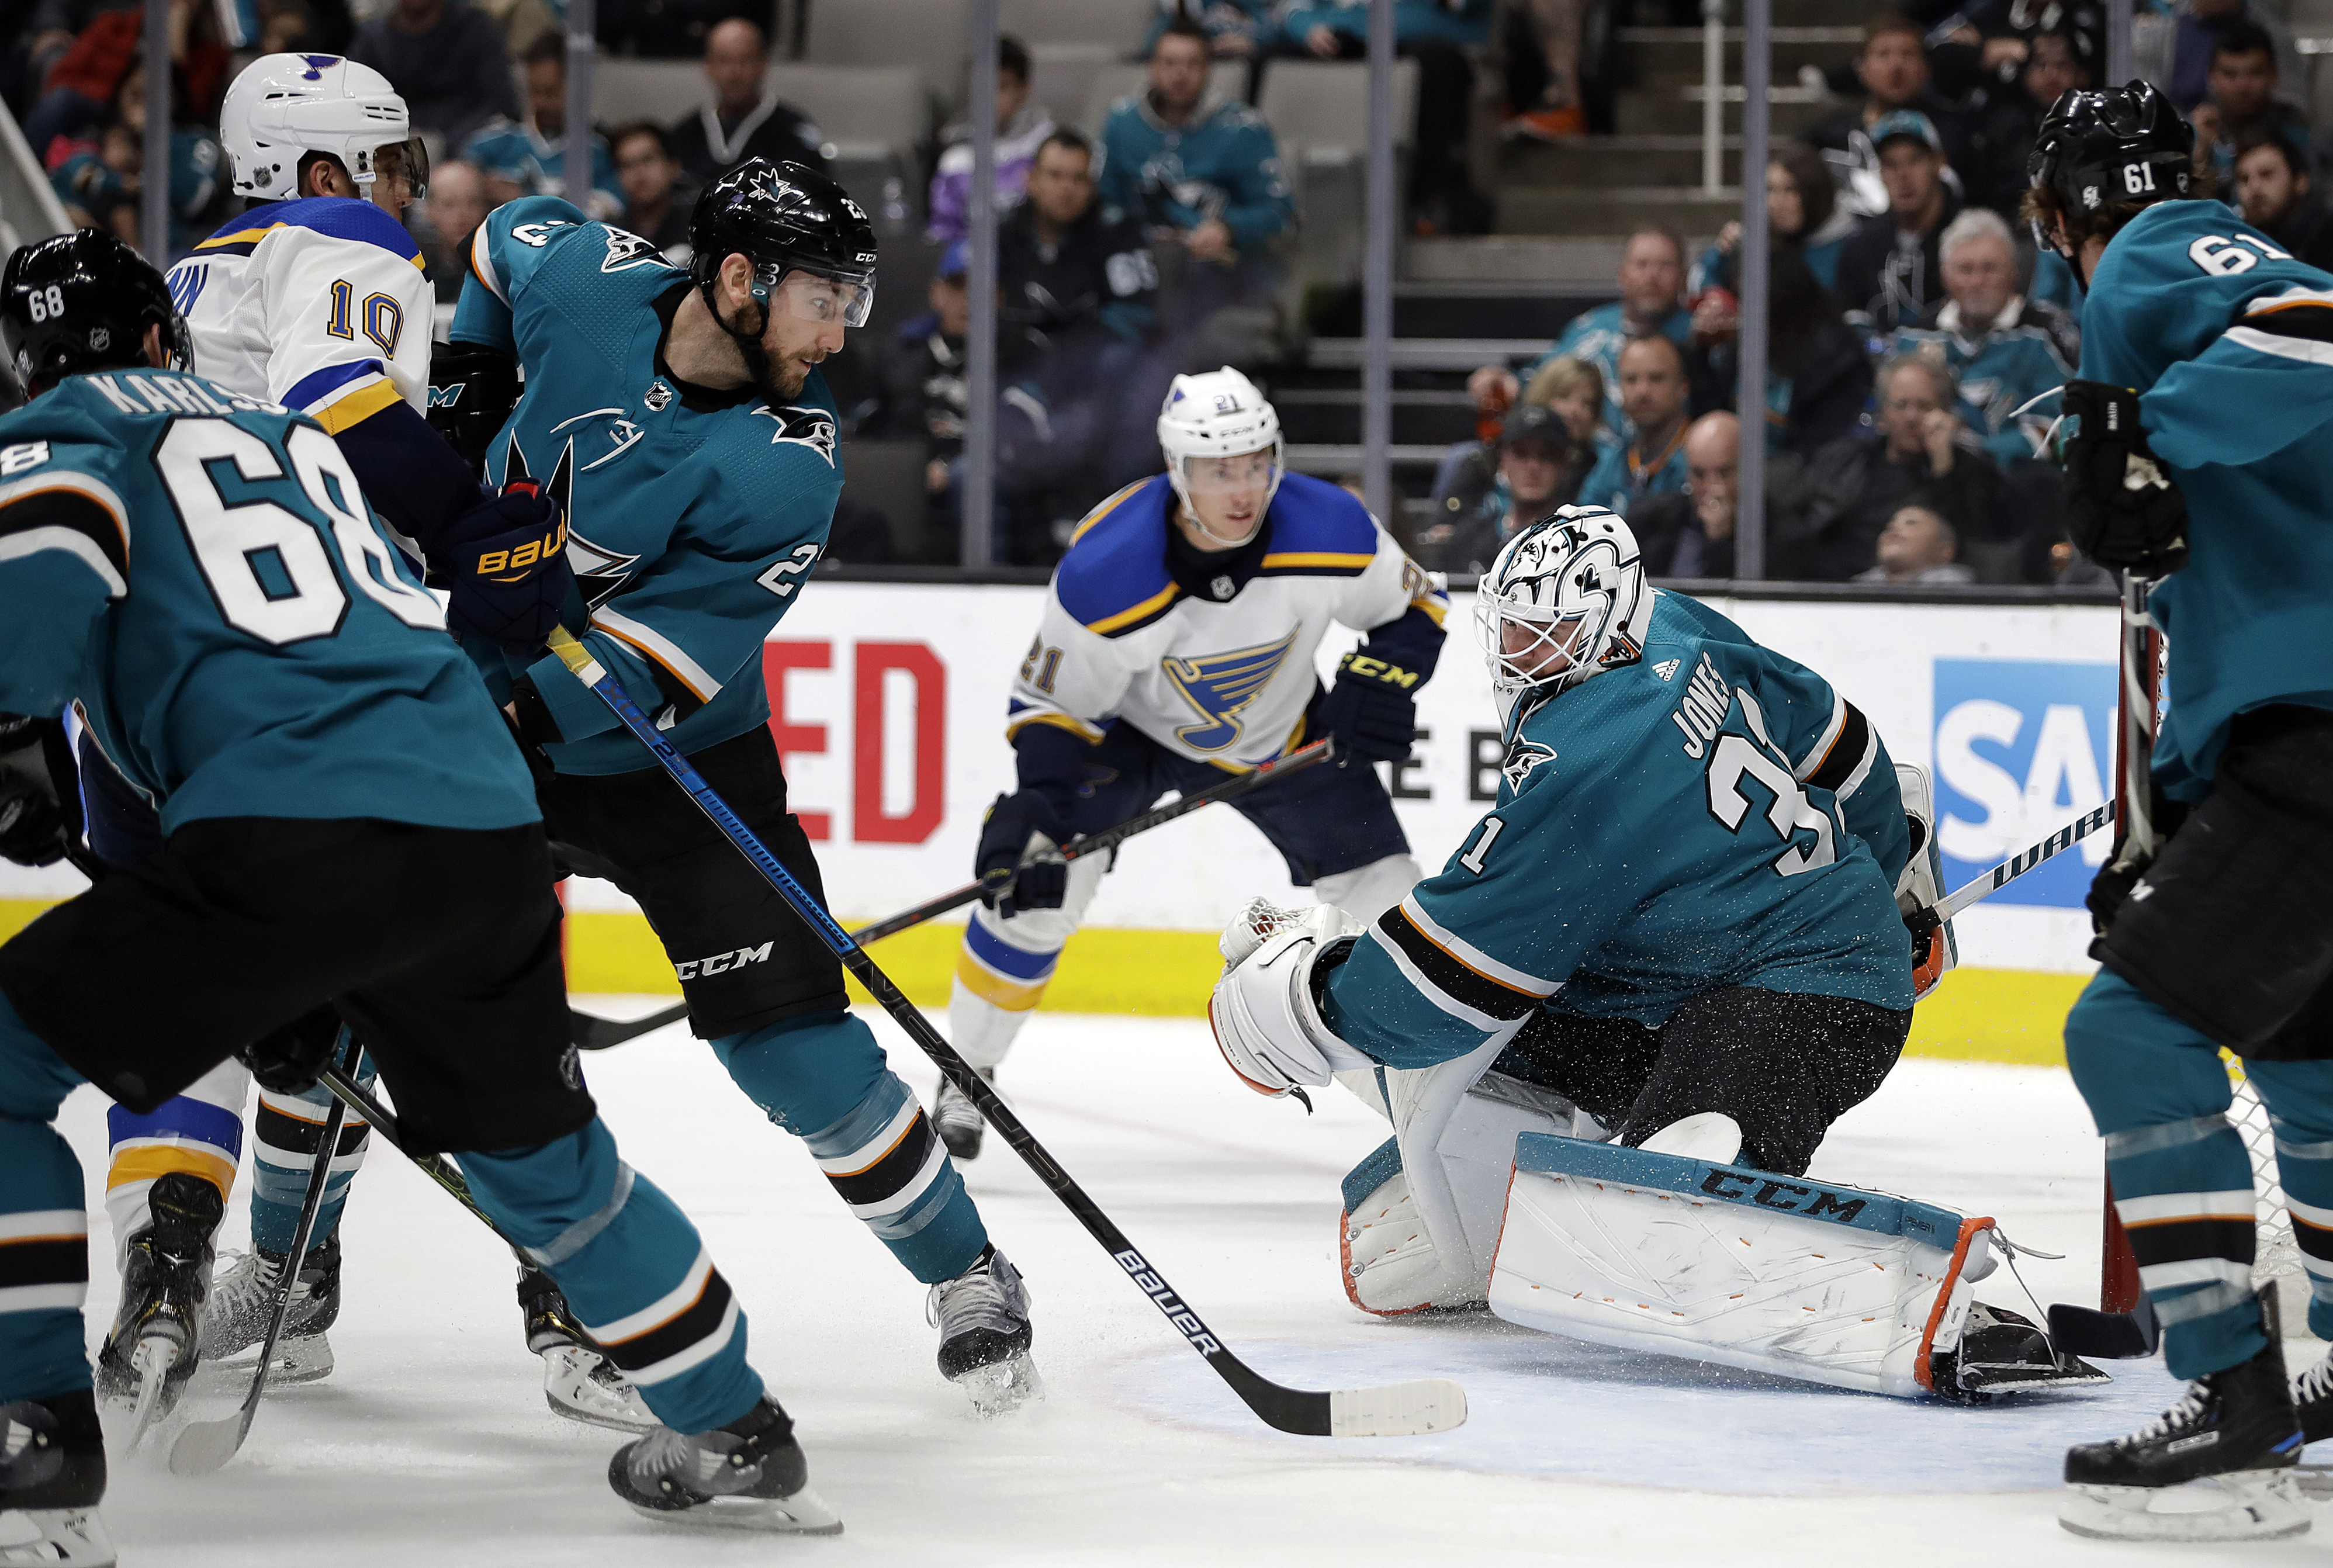 Sharks beat Blues 3-2 in OT to take Western Conference lead